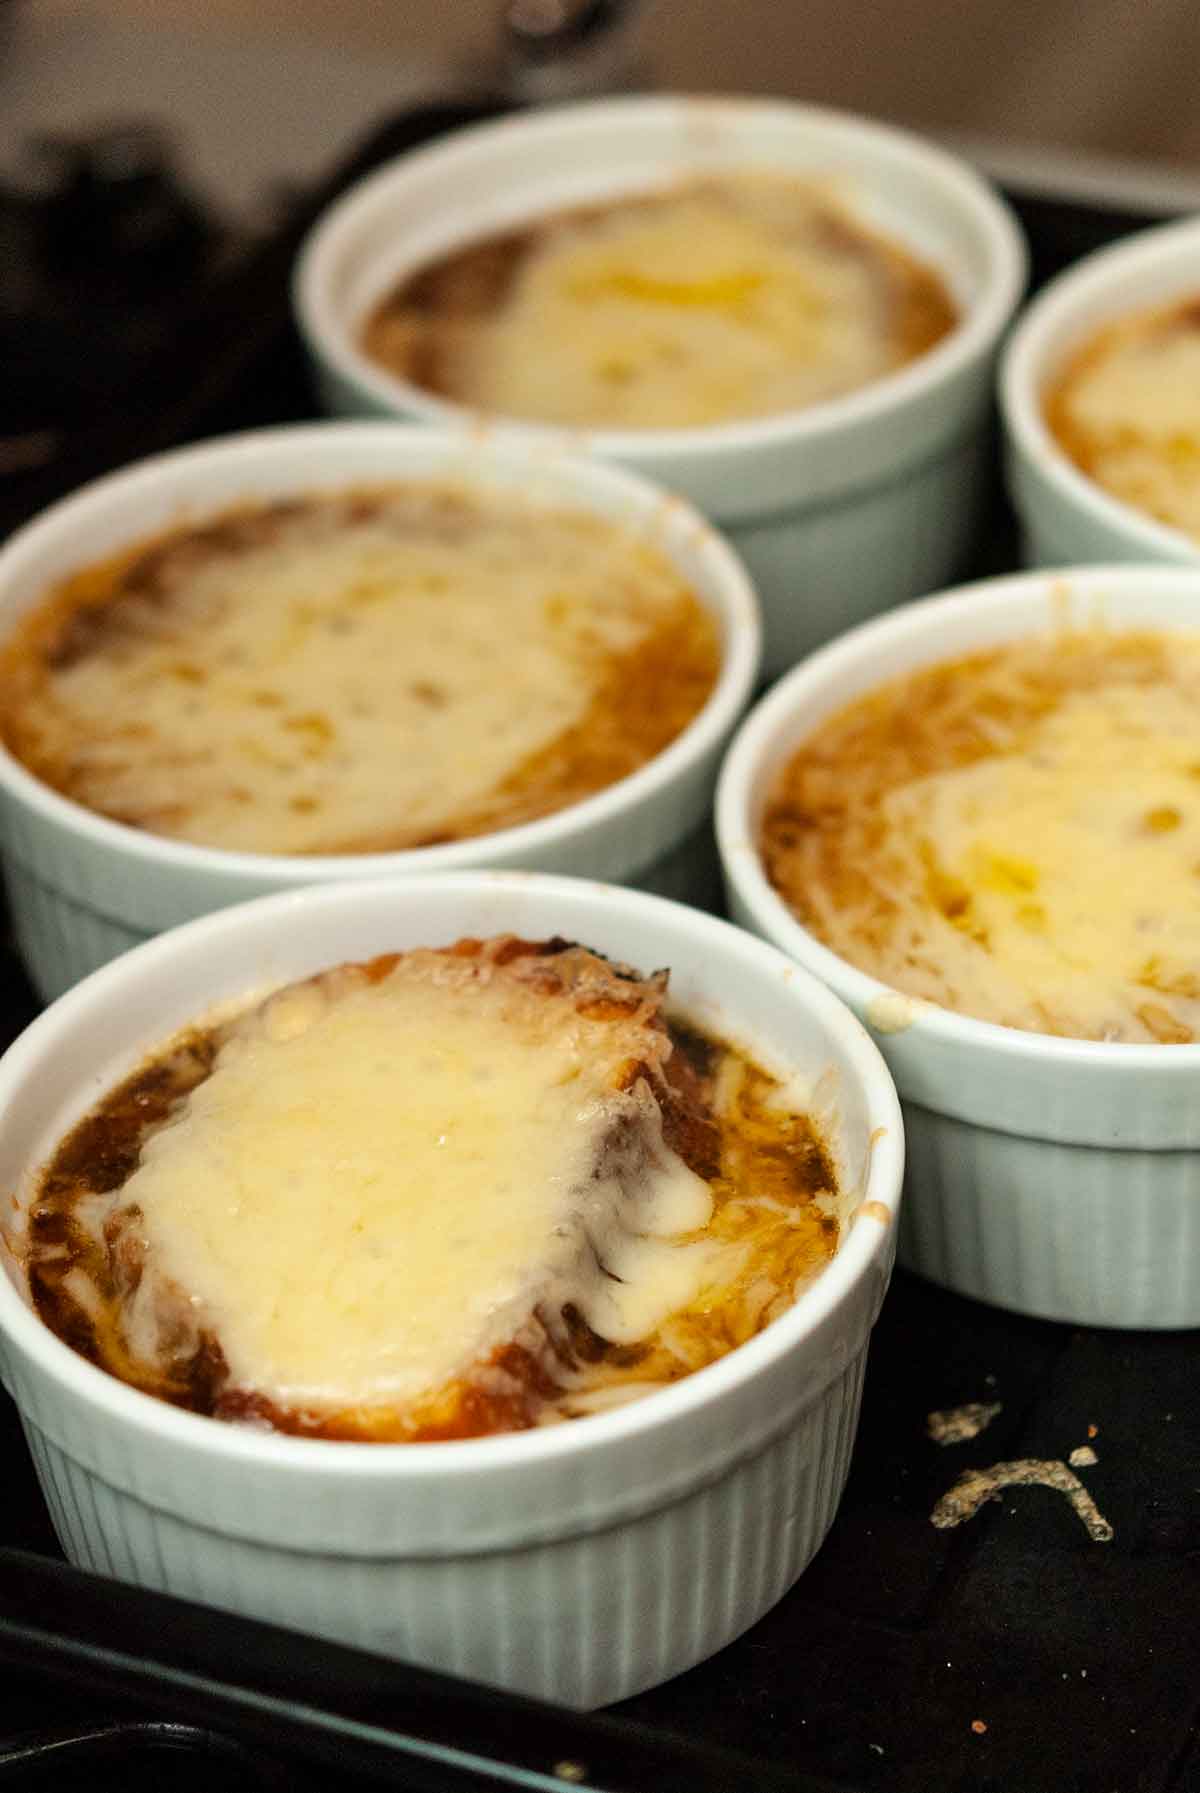 5 bowls of french onion soup with melted cheese.